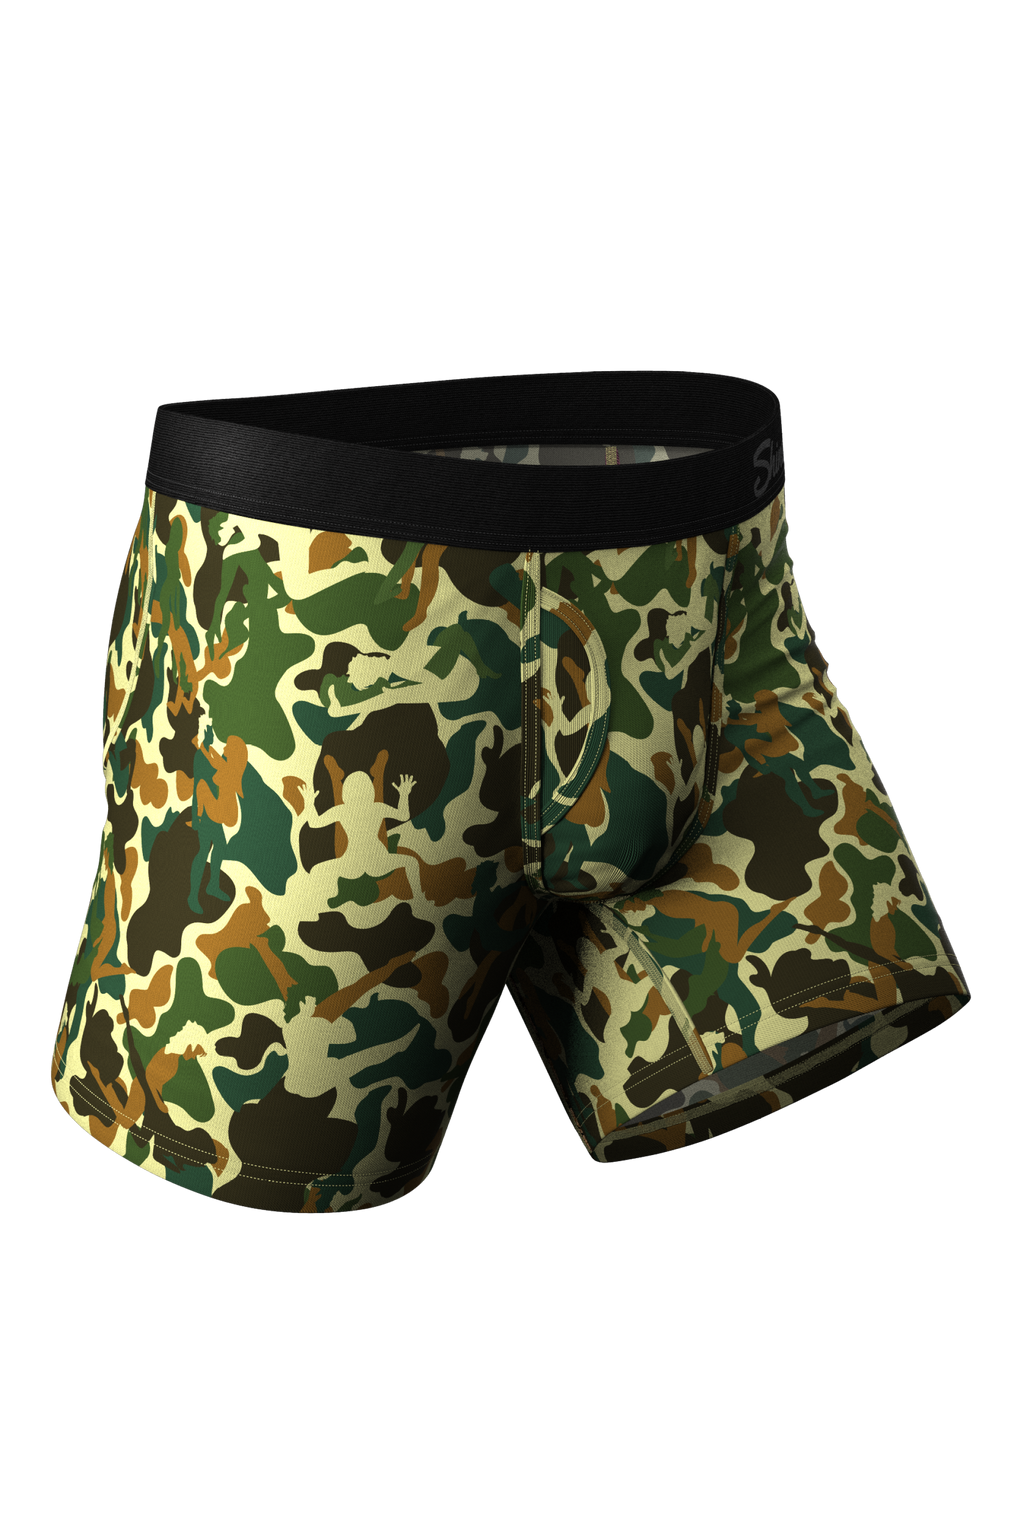 naughty camouflage boxers